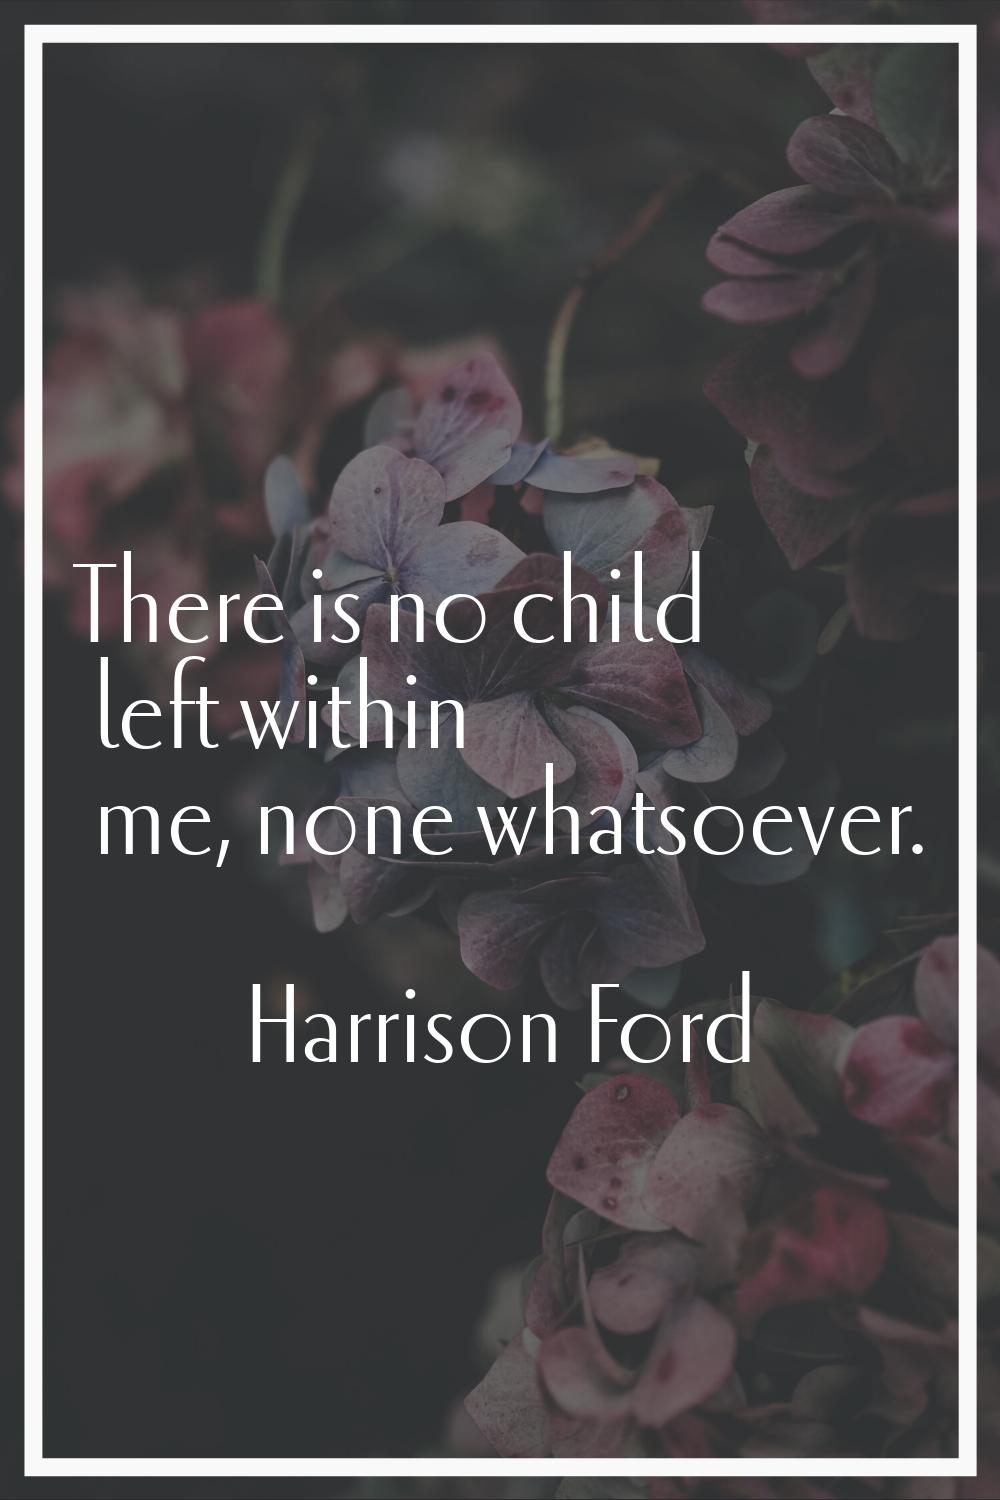 There is no child left within me, none whatsoever.